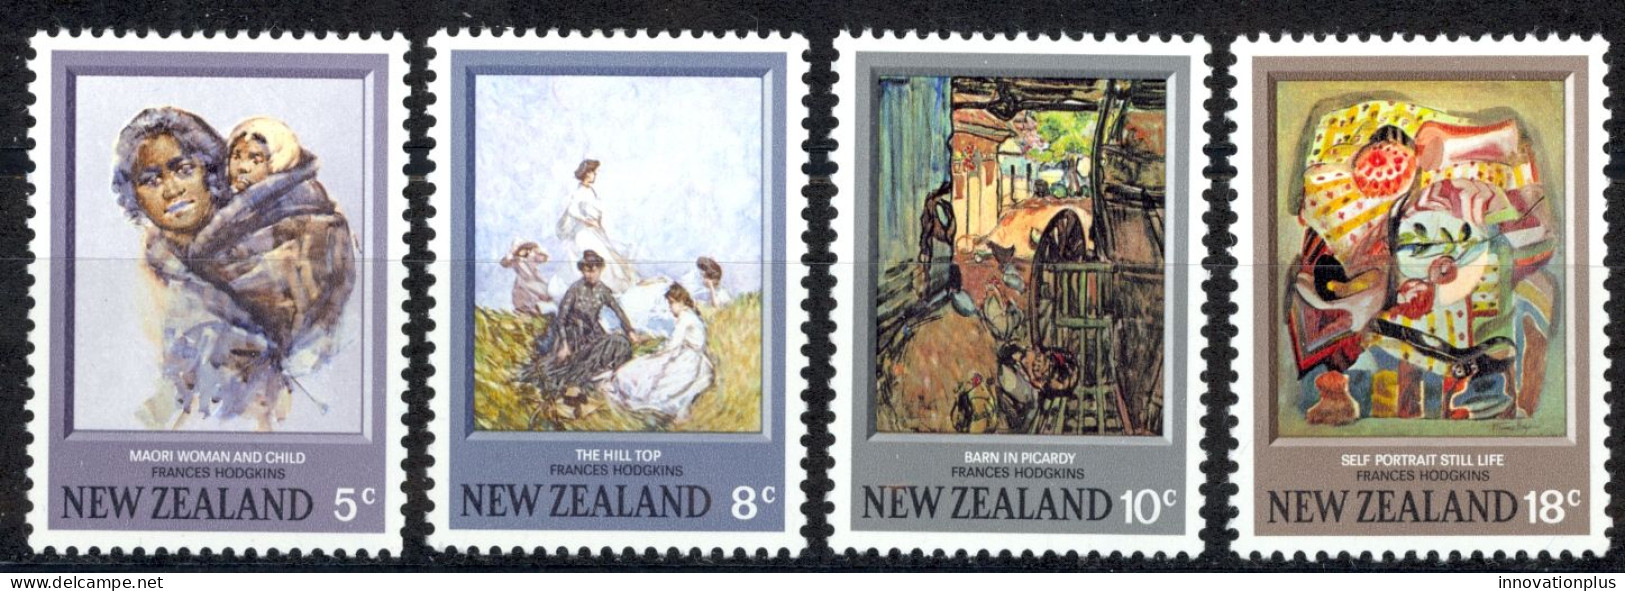 New Zealand Sc# 521-524 SG# 1027/1030 MNH 1973 Paintings/F.Hodgkins - Unused Stamps